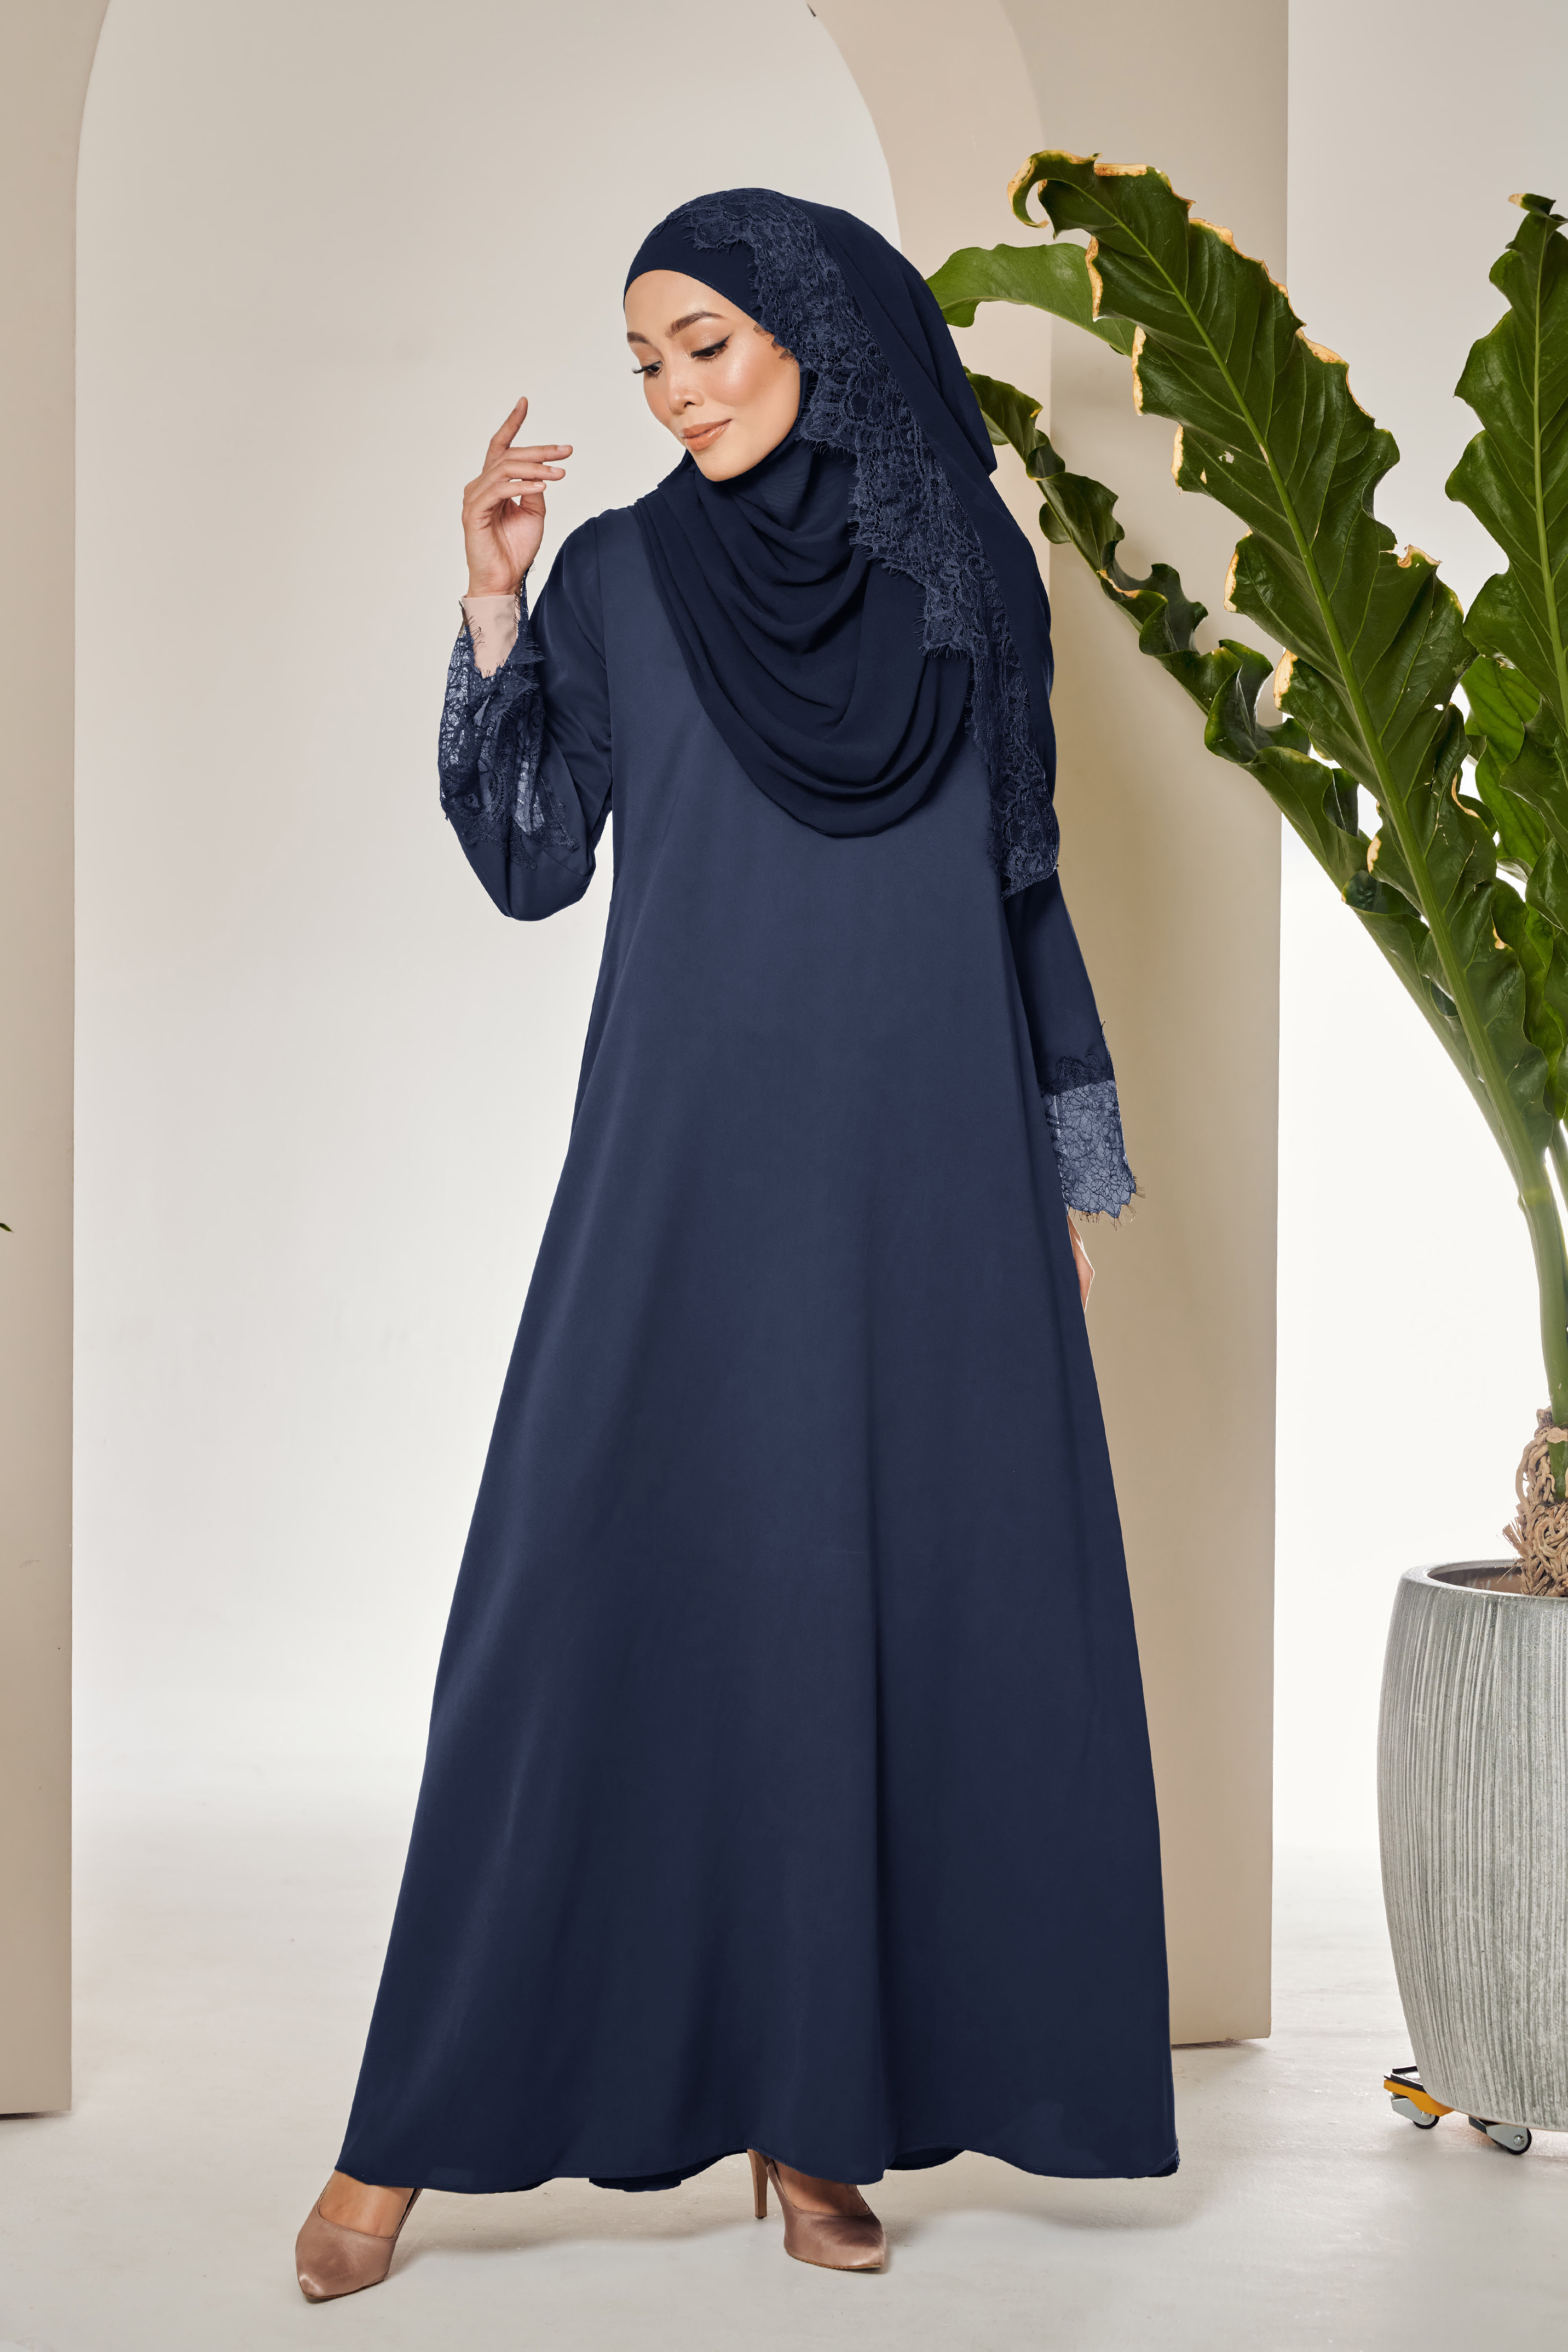 (AS-IS) AMIA Abaya in Navy Blue